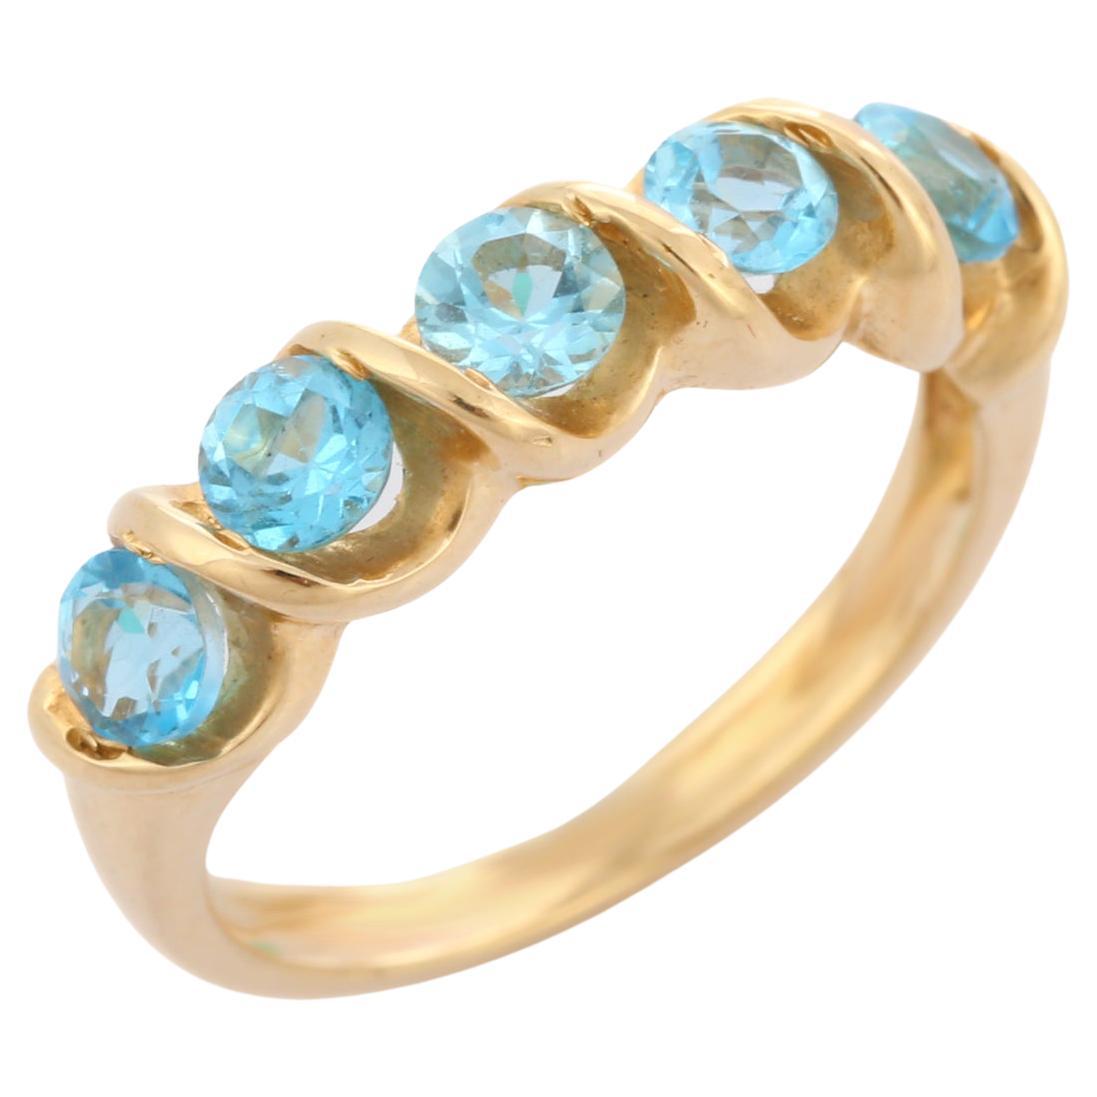 For Sale:  Blue Topaz Band Ring in 14k Solid Yellow Gold, December Birthstone Band